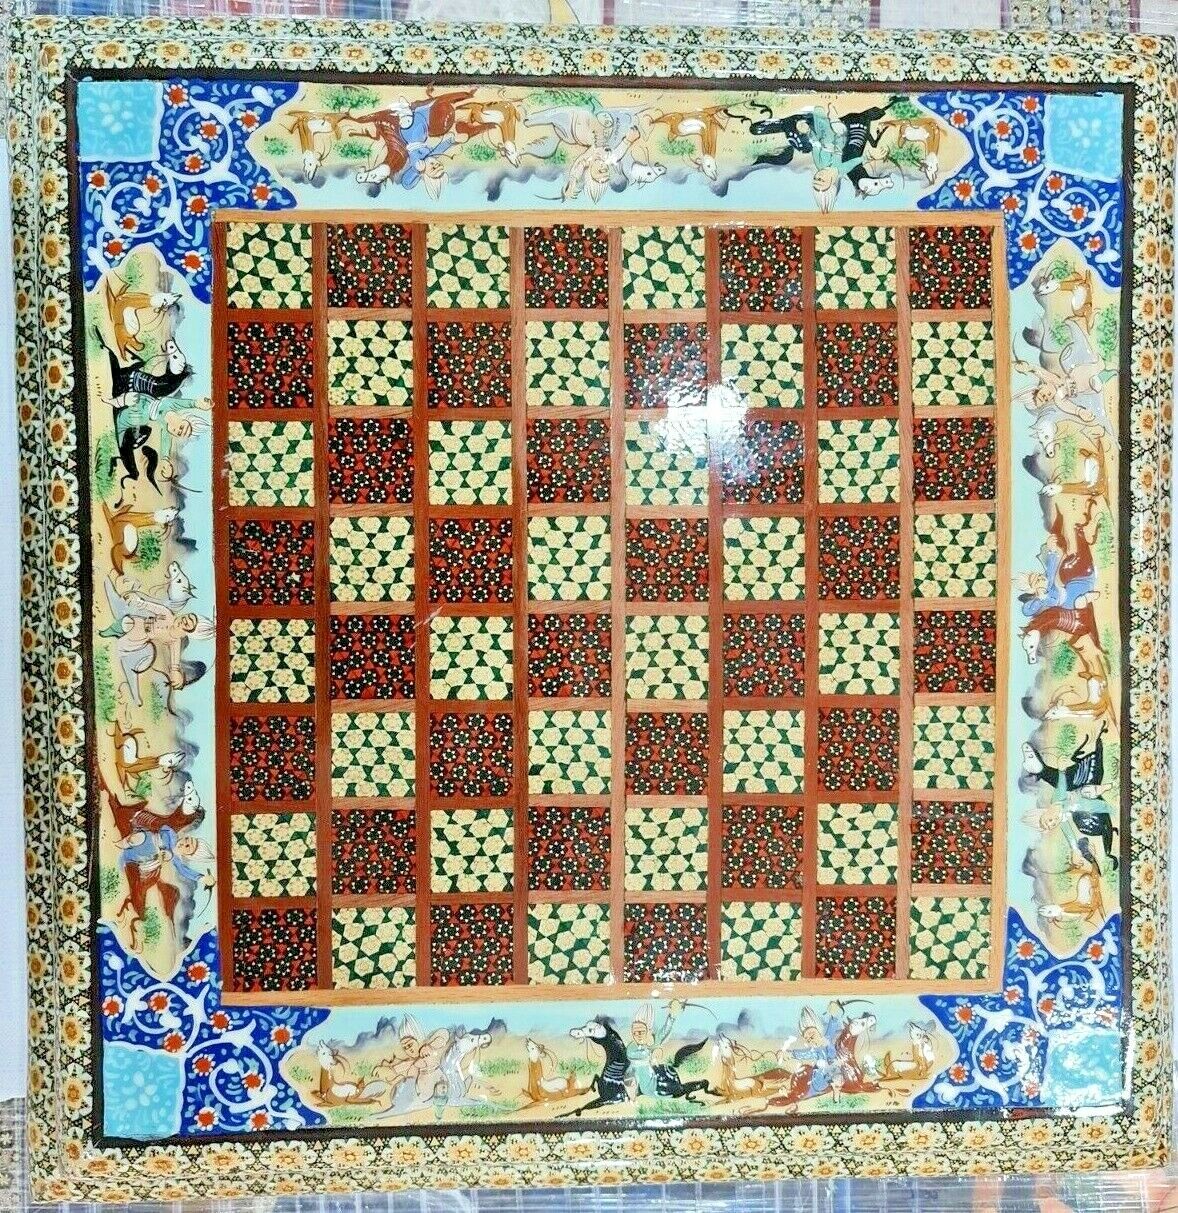 HANDCRAFTED Persian Chess Board Game Khatam Handpainted Oriental Wooden Chess 